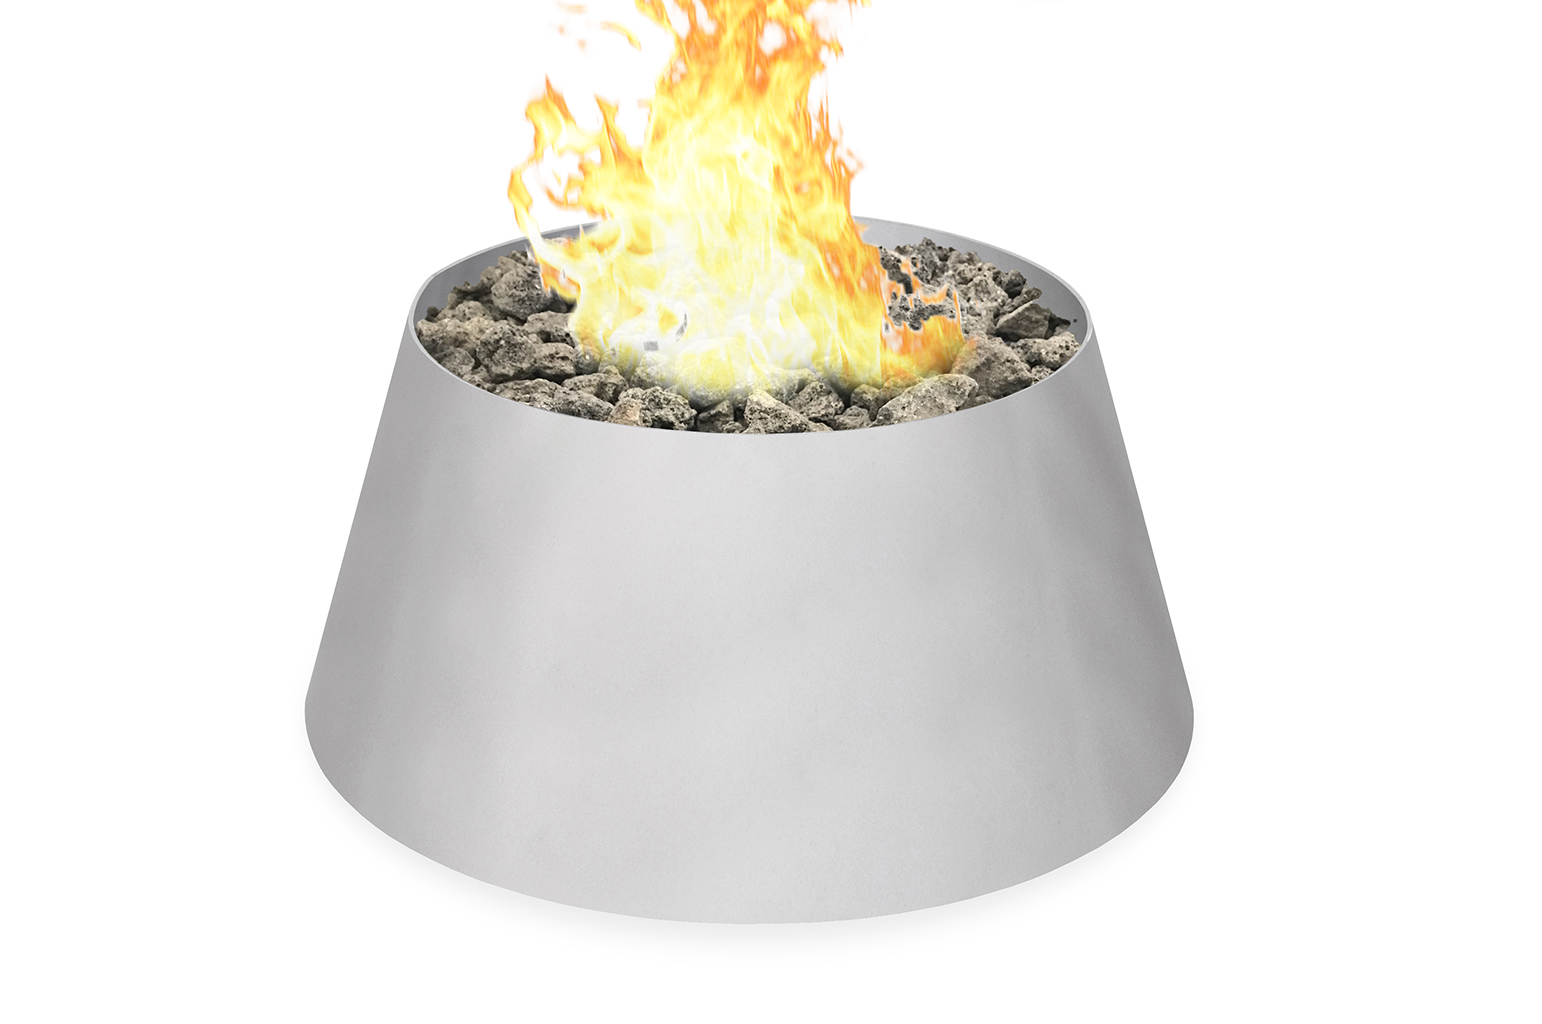 30 40 Inch Stainless Cone Gas Fire Pit, Soho Fire Pit